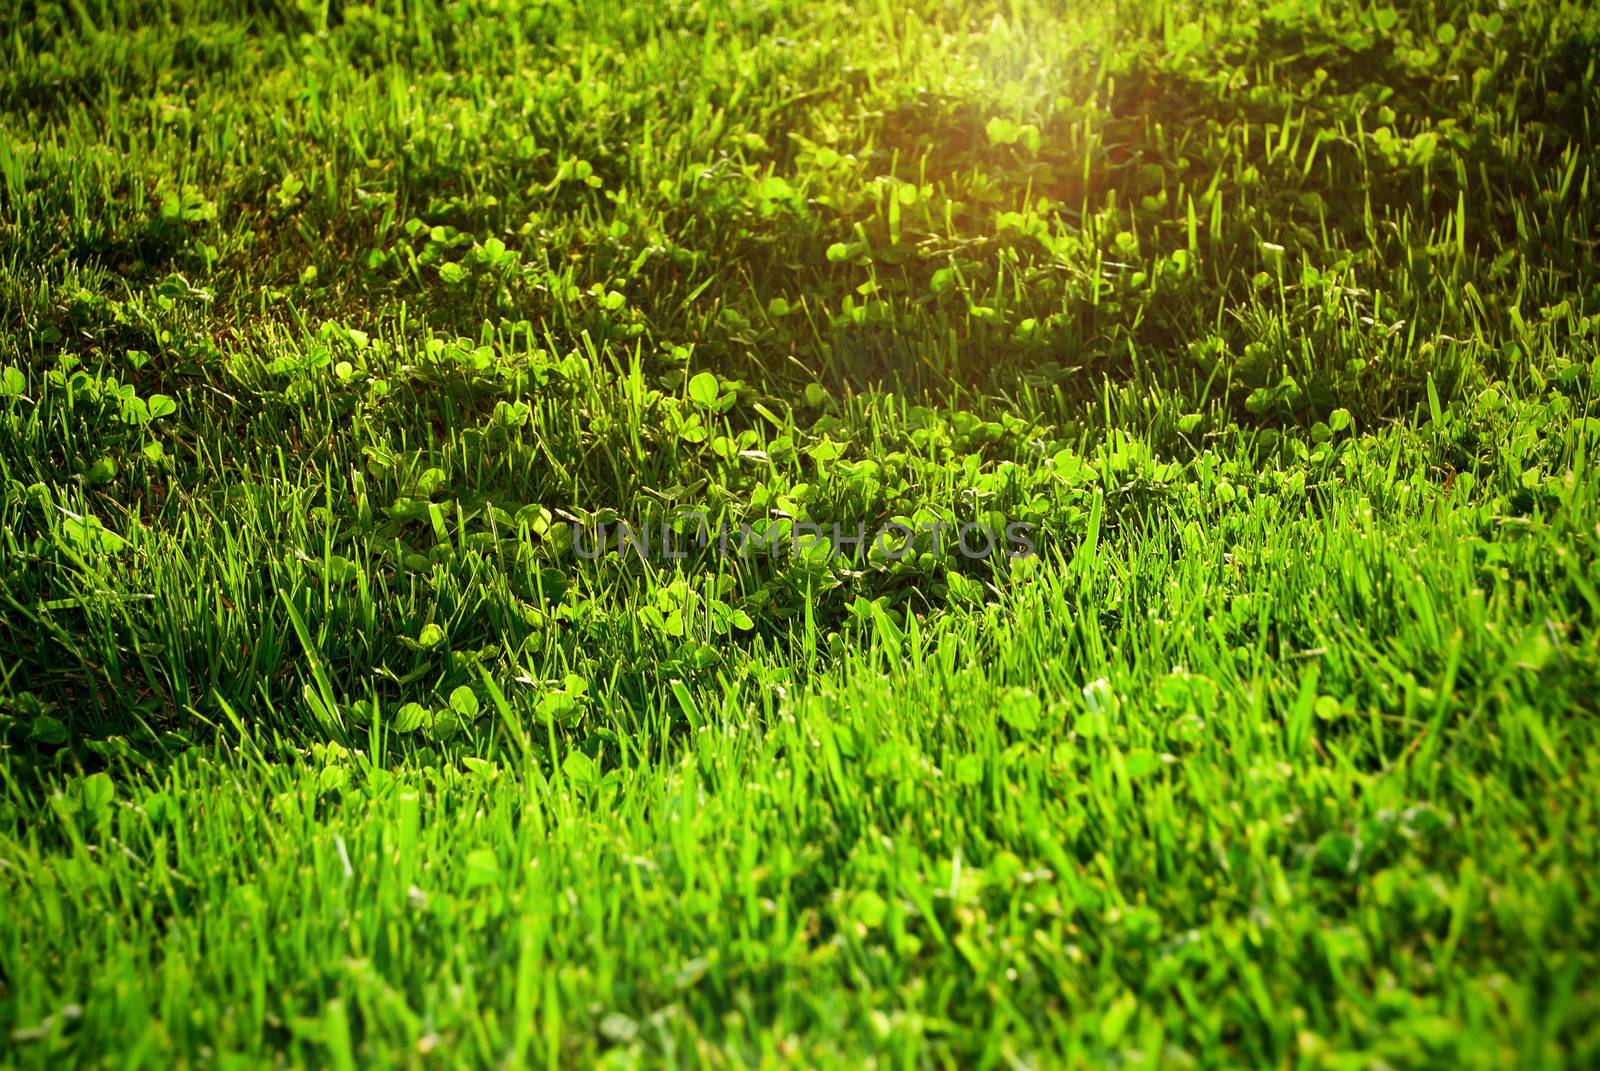 Lawn with blooming green grass in the sun.